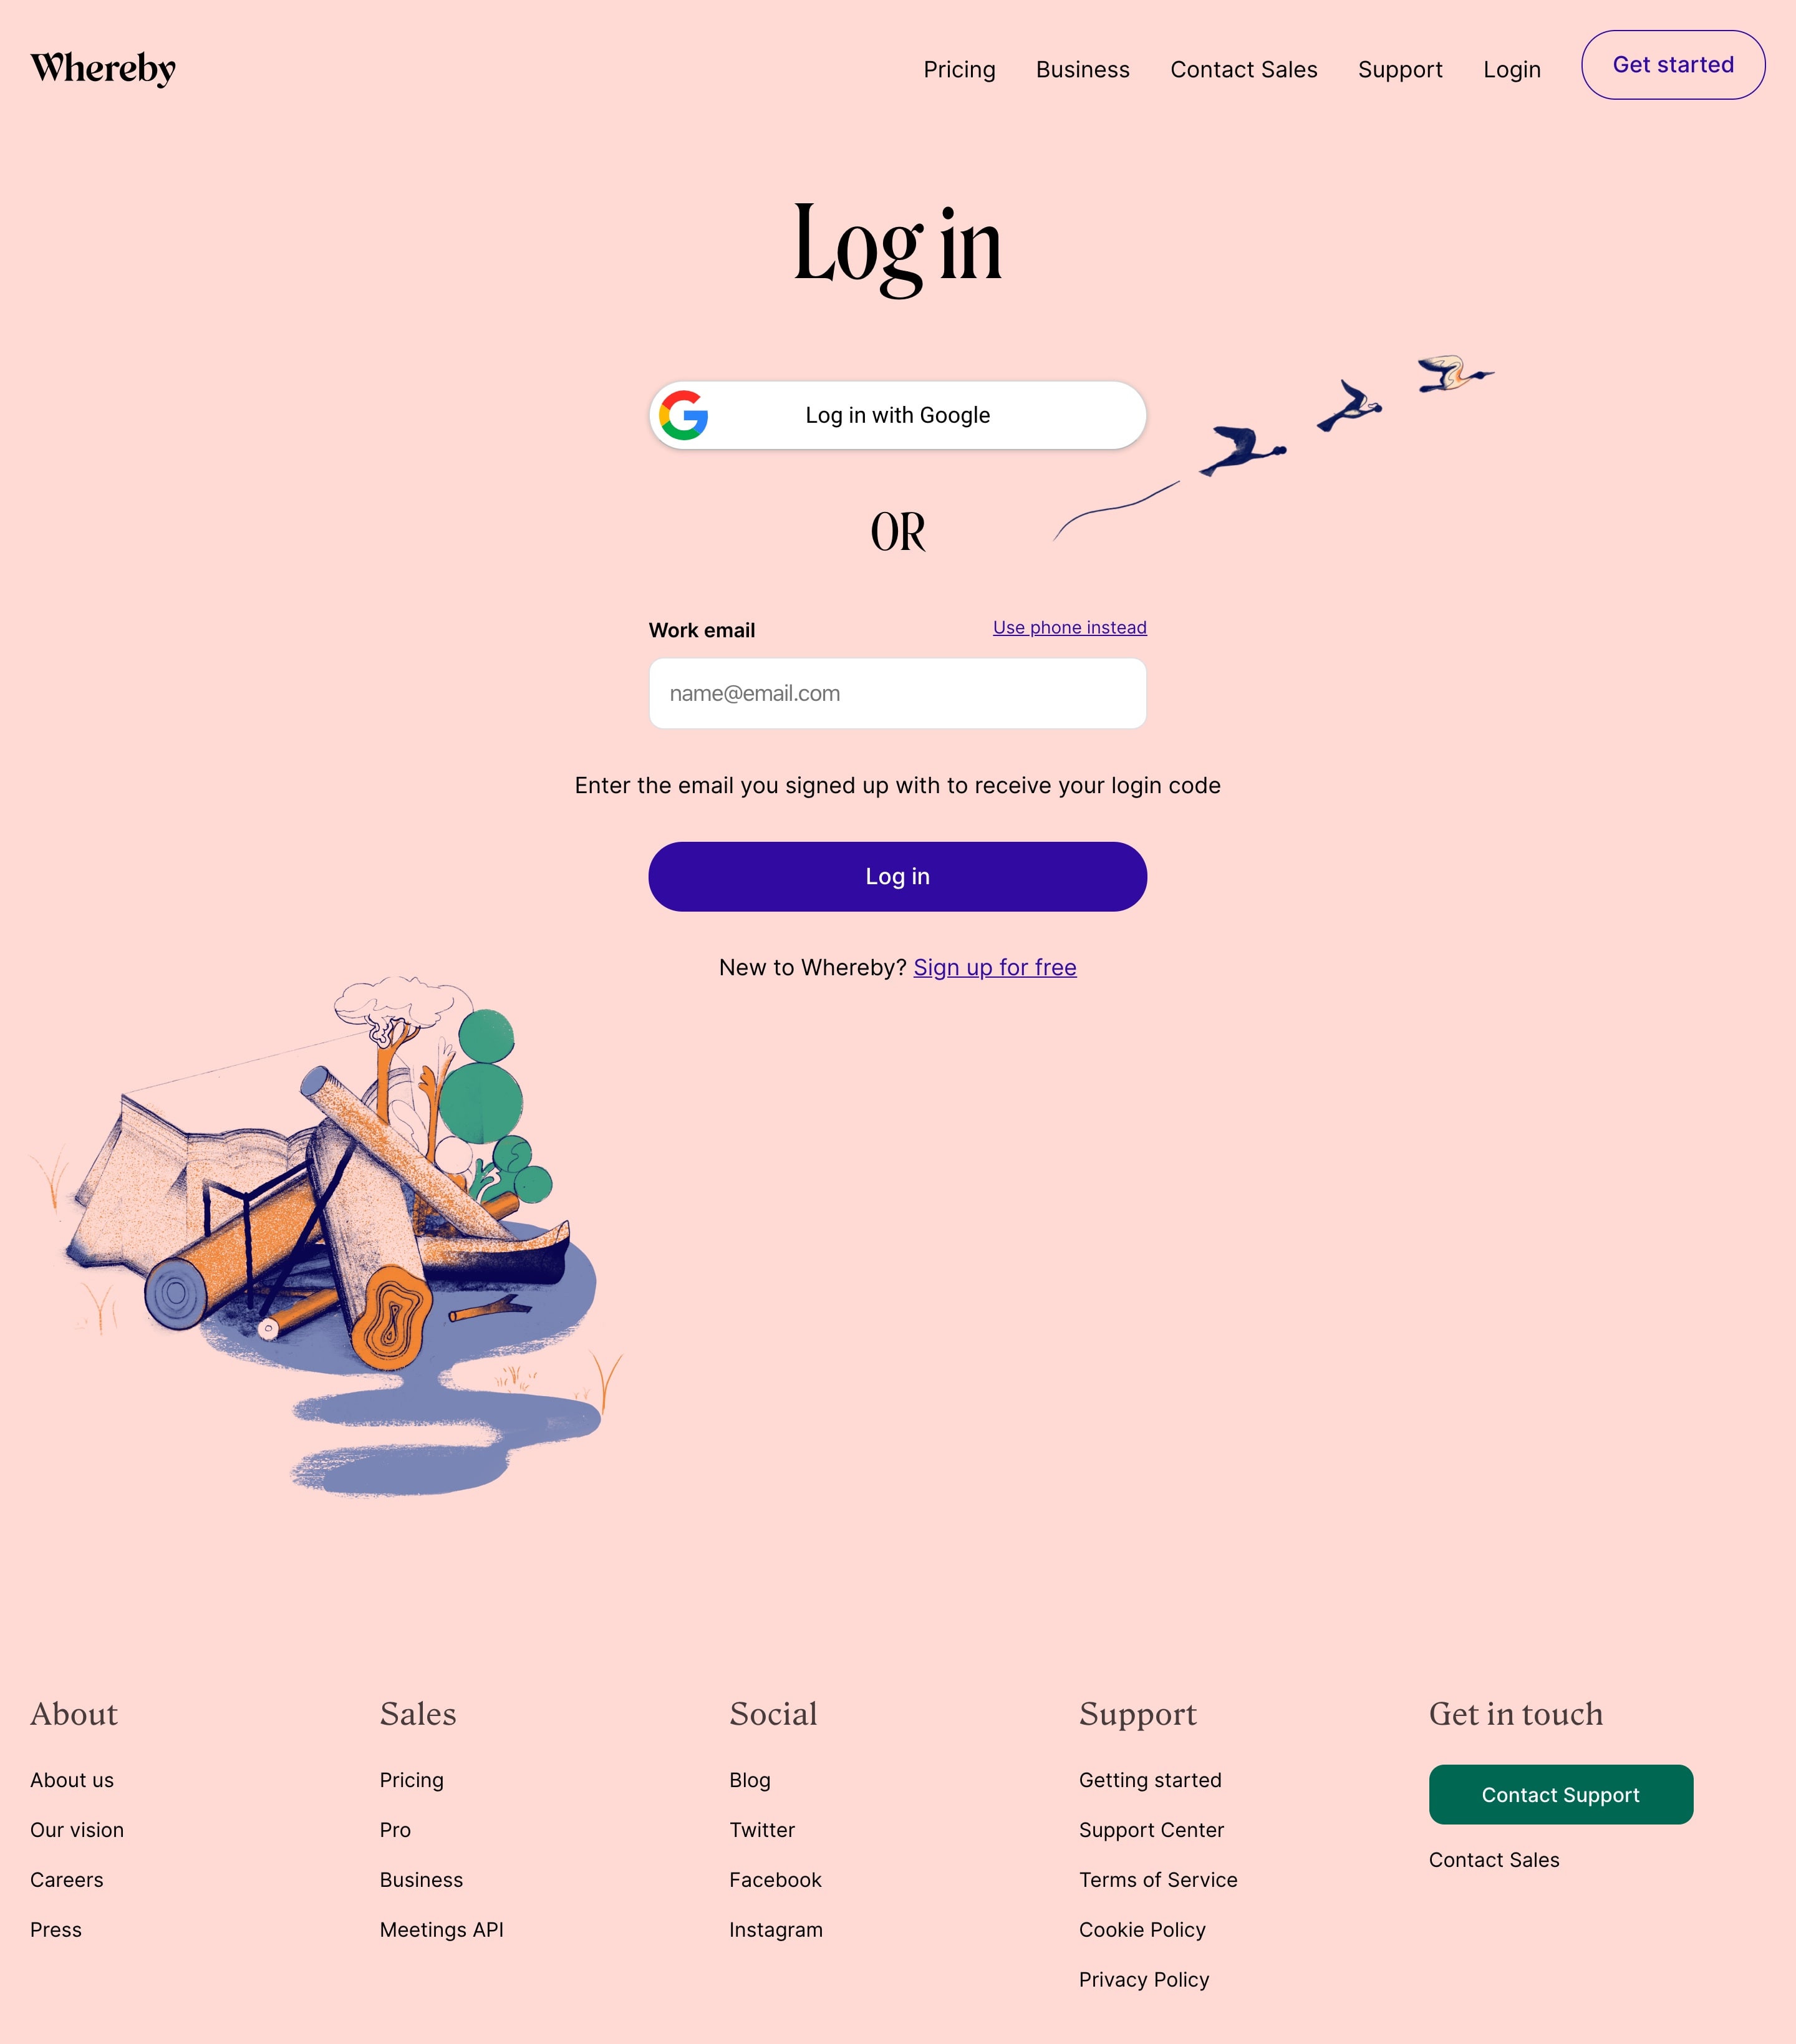 whereby log in page